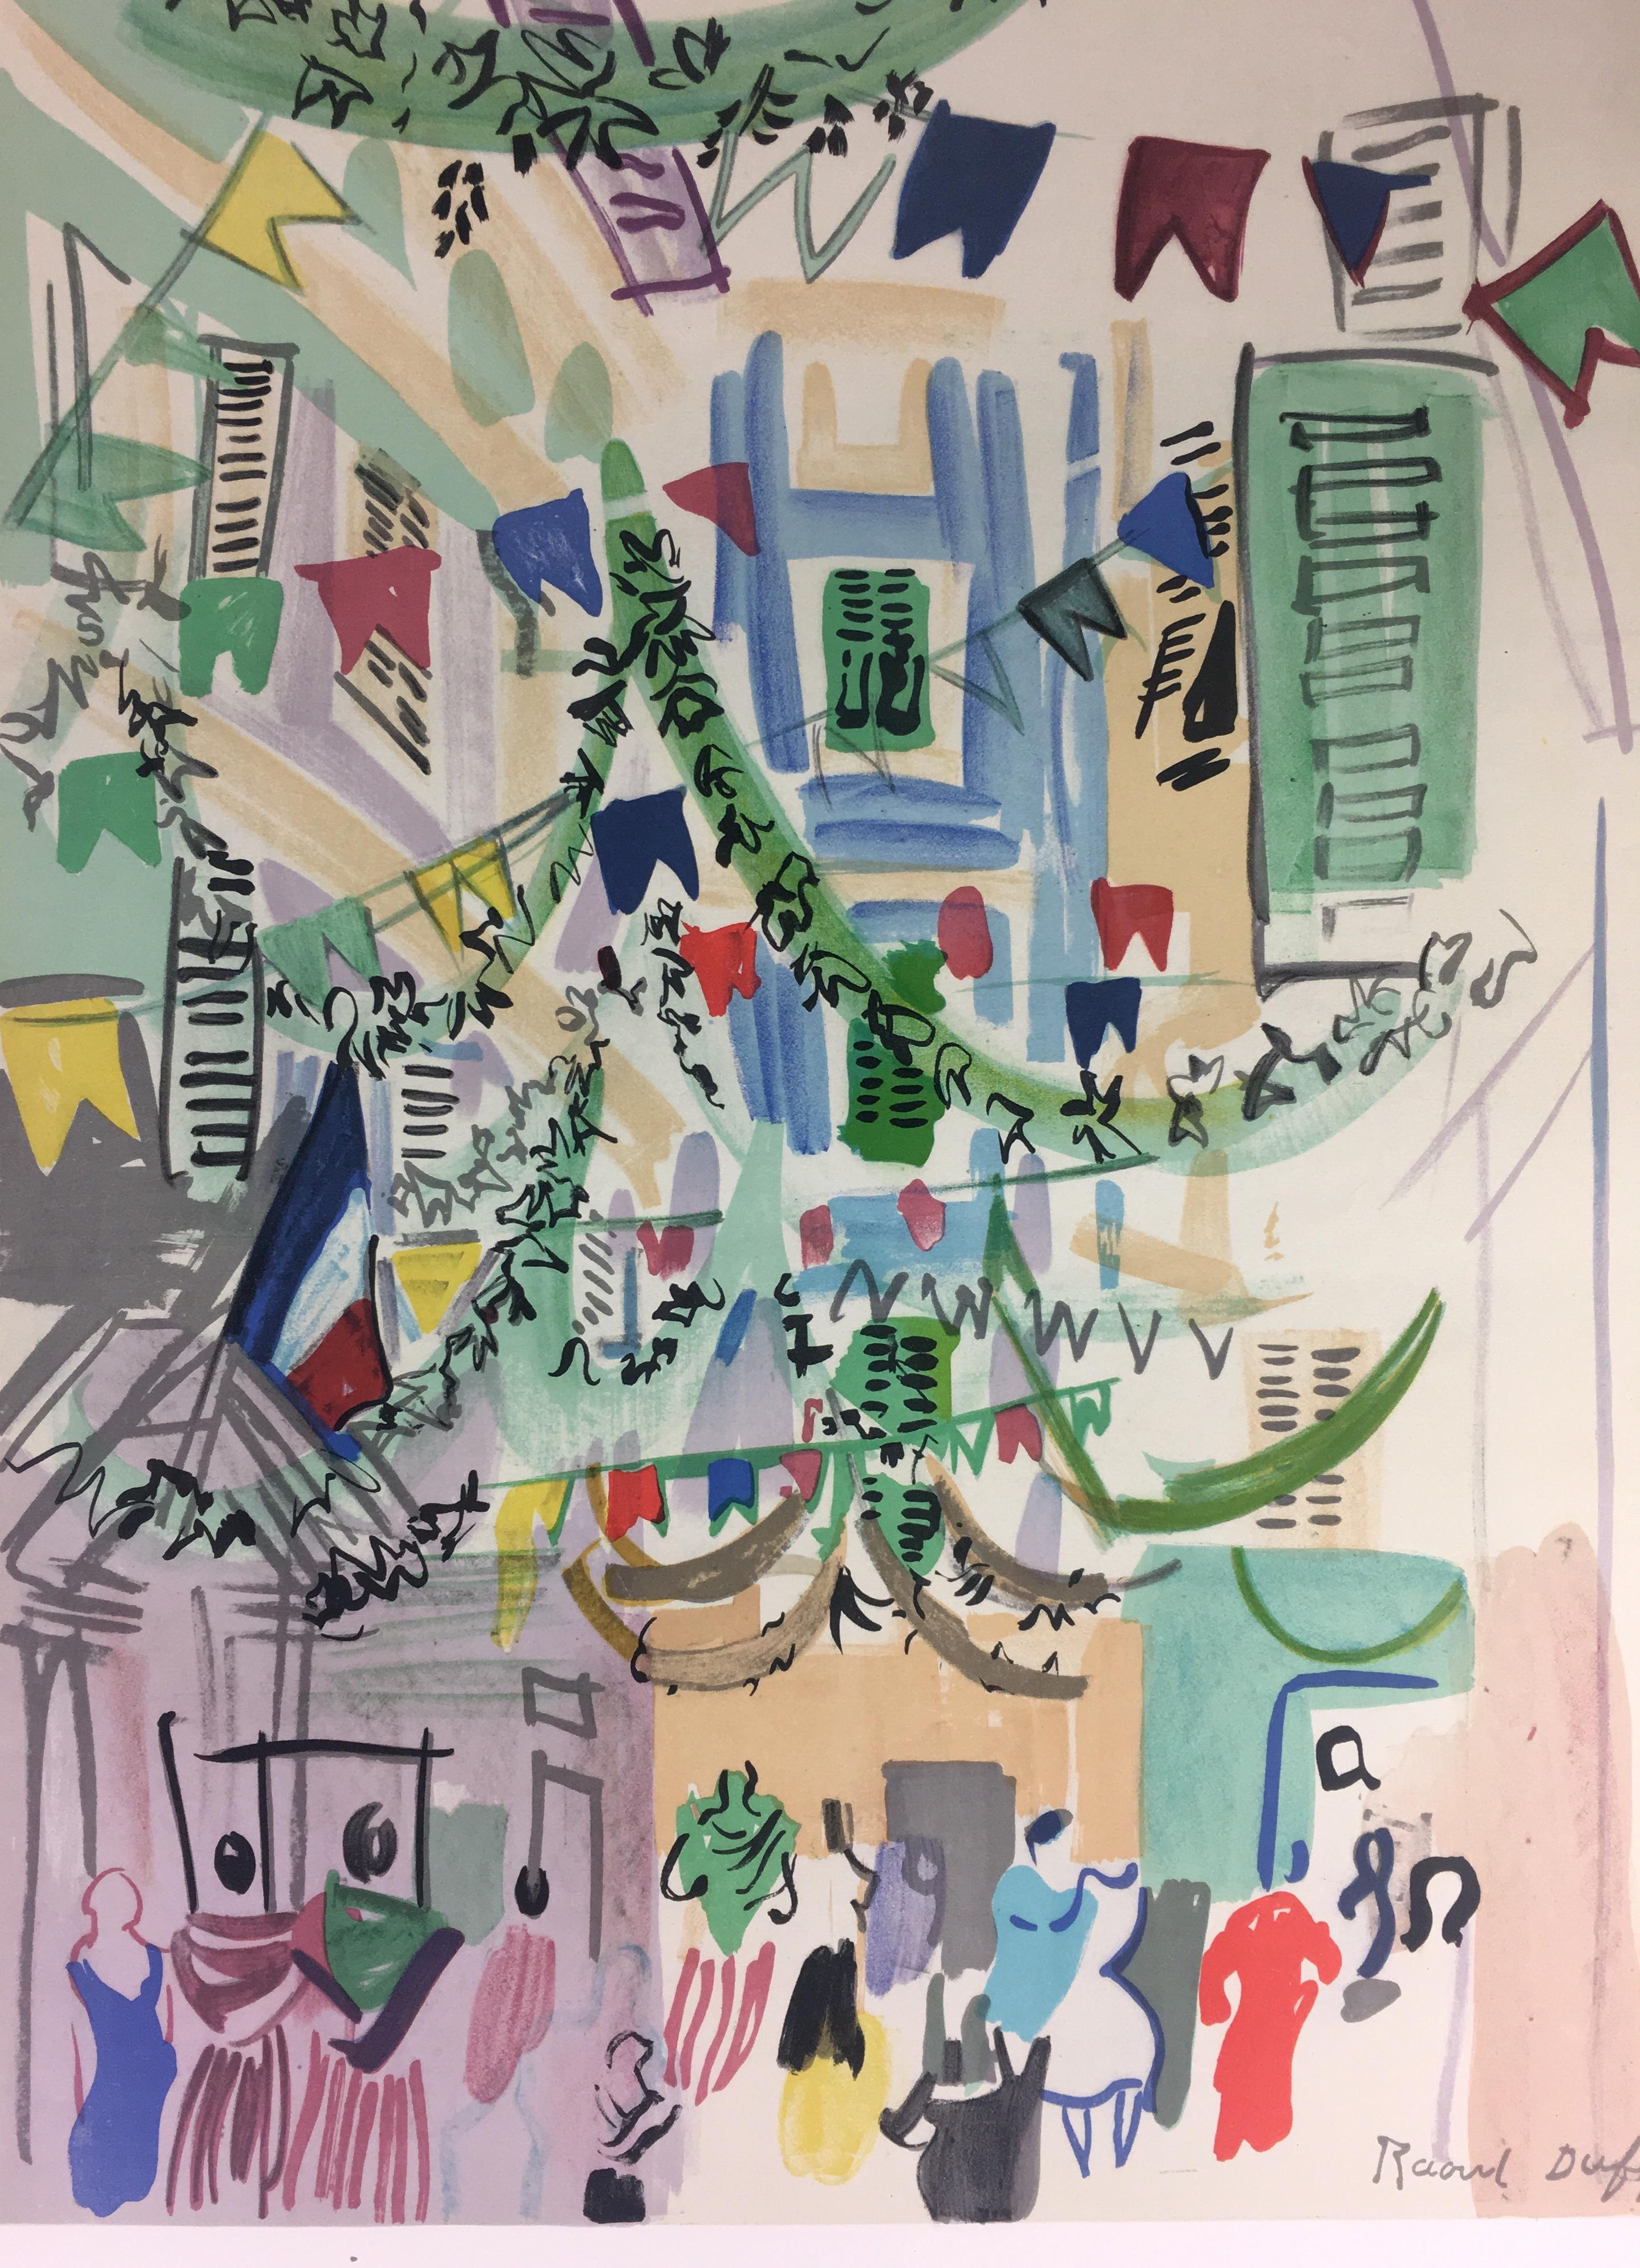 Original mid century Raoul Dufy art poster from the 1950s printed by Mourlot Paris. 

Raoul Dufy was a renowned artist that created excellent works of art in both contemporary and Mid-Century Modern styles. 
This is a vintage poster, not a reprint.